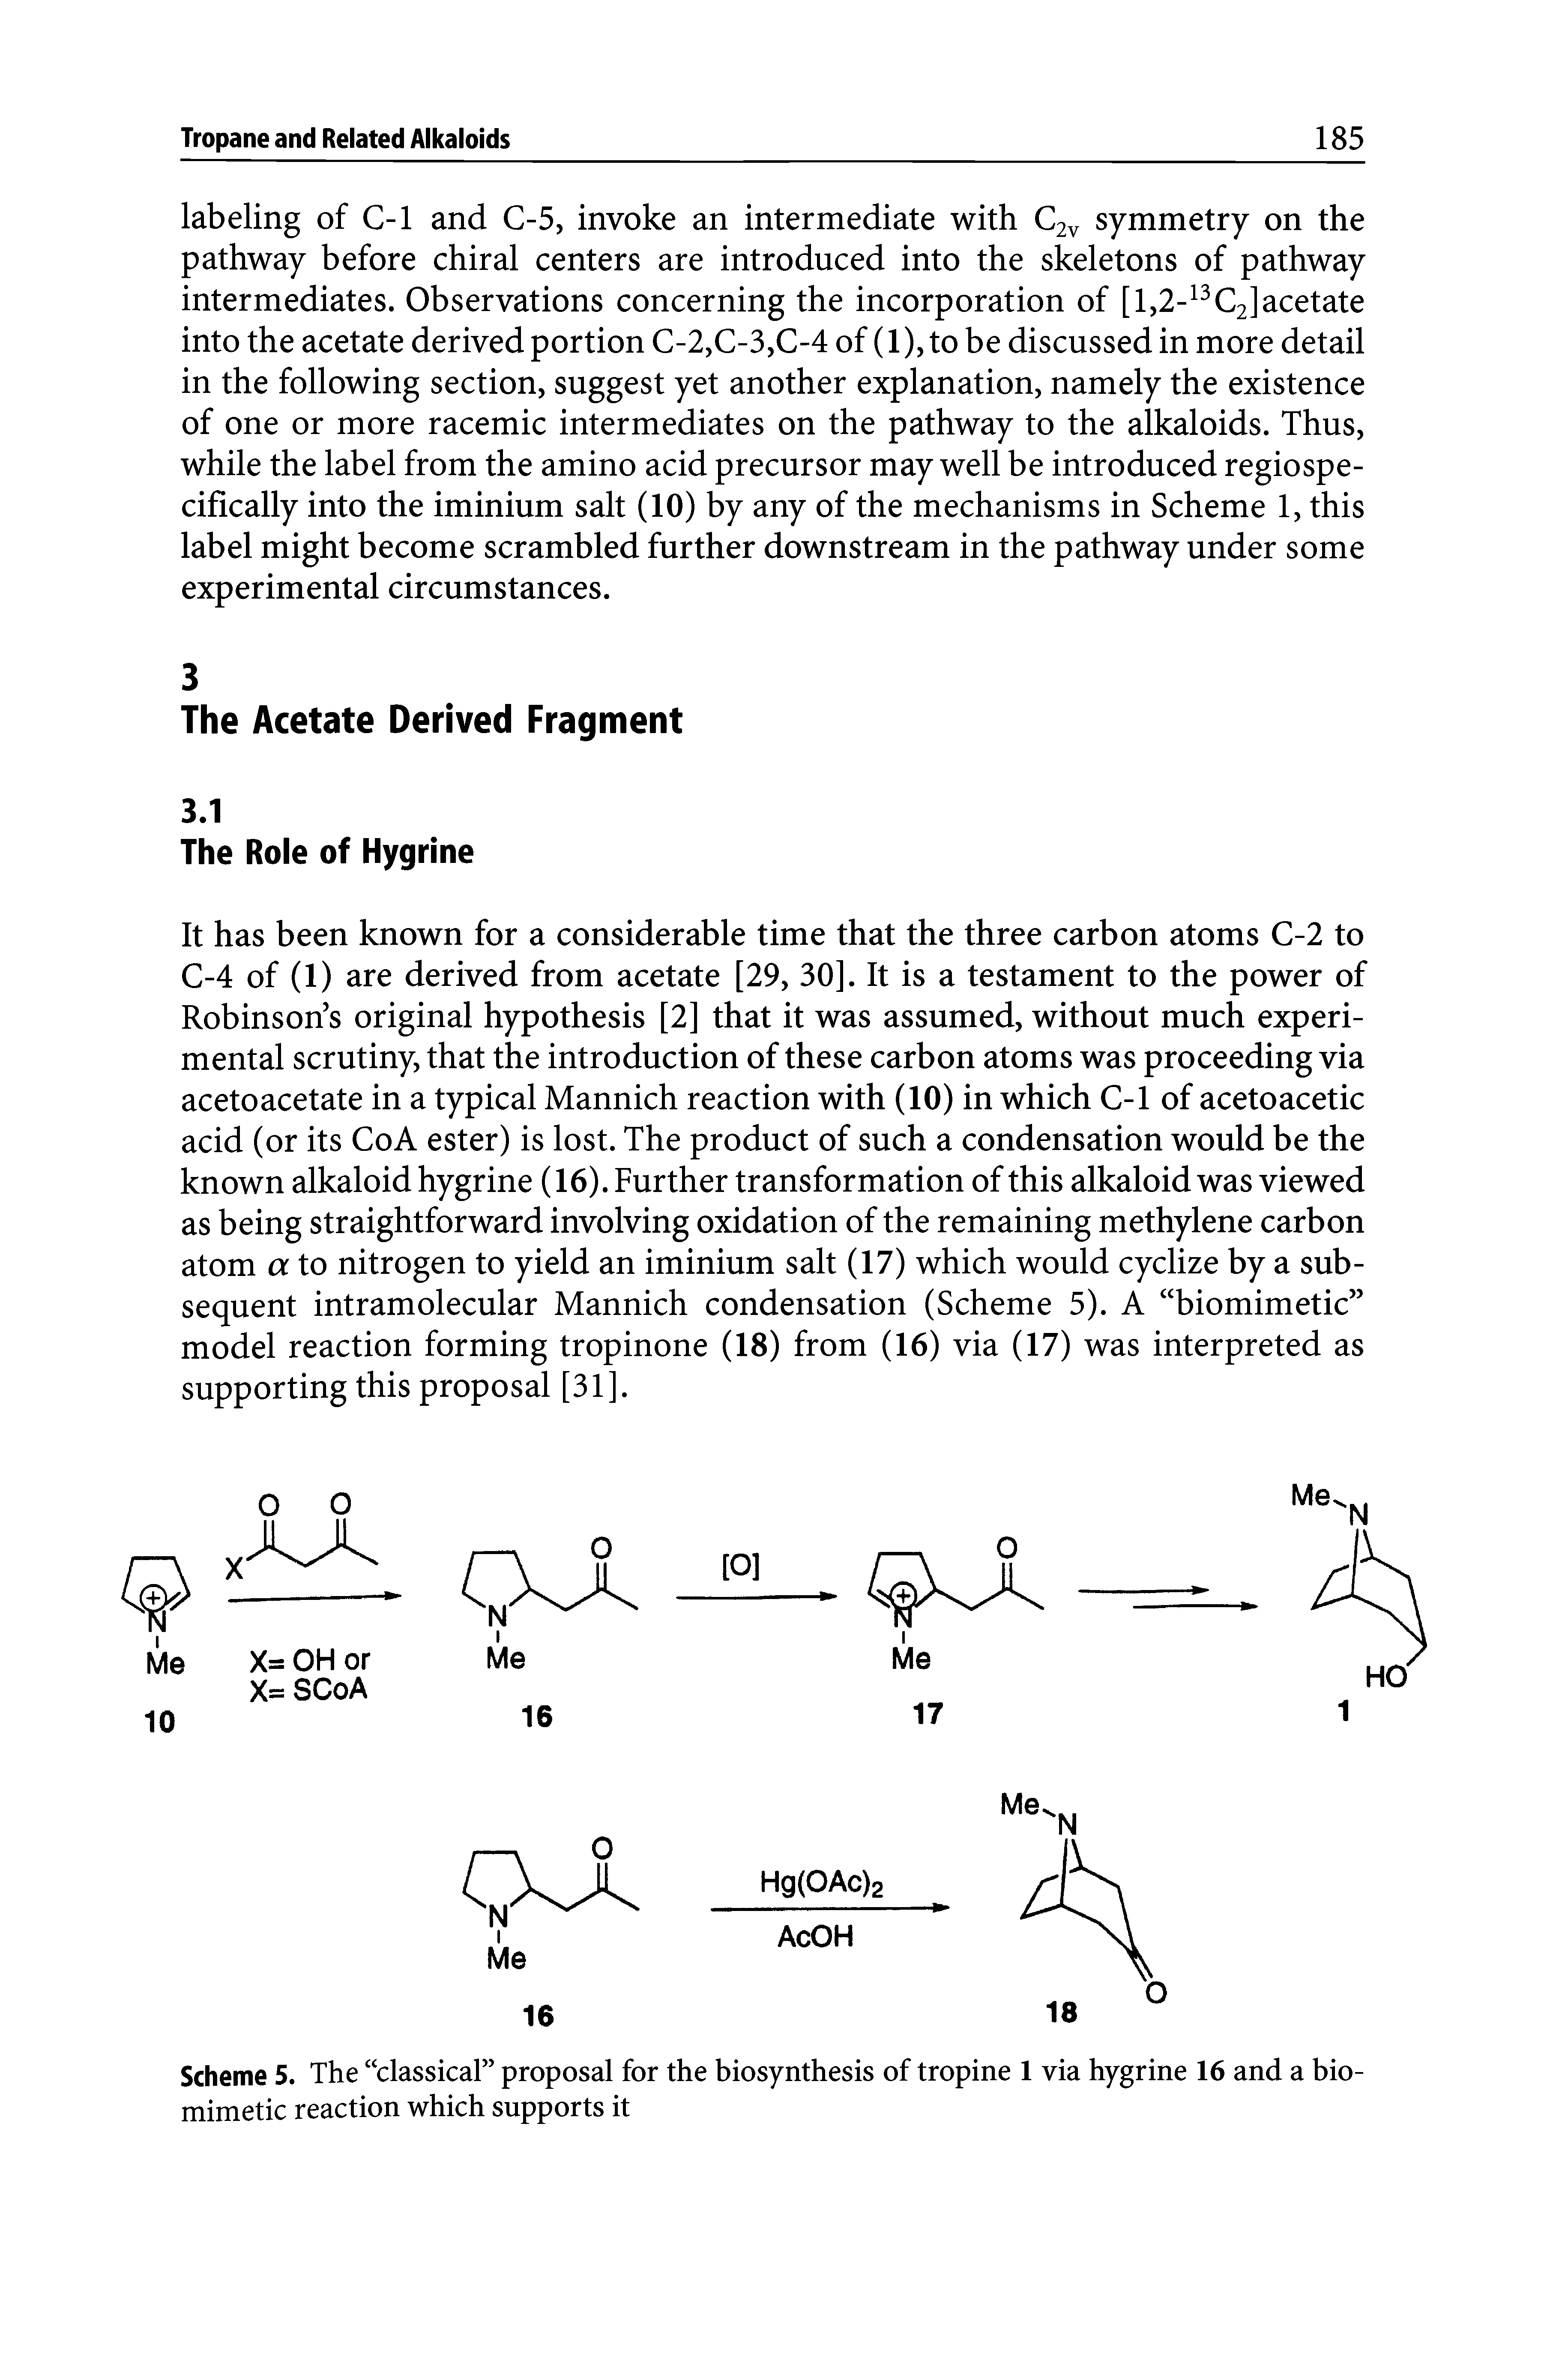 Scheme 5. The classical proposal for the biosynthesis of tropine 1 via hygrine 16 and a bio-mimetic reaction which supports it...